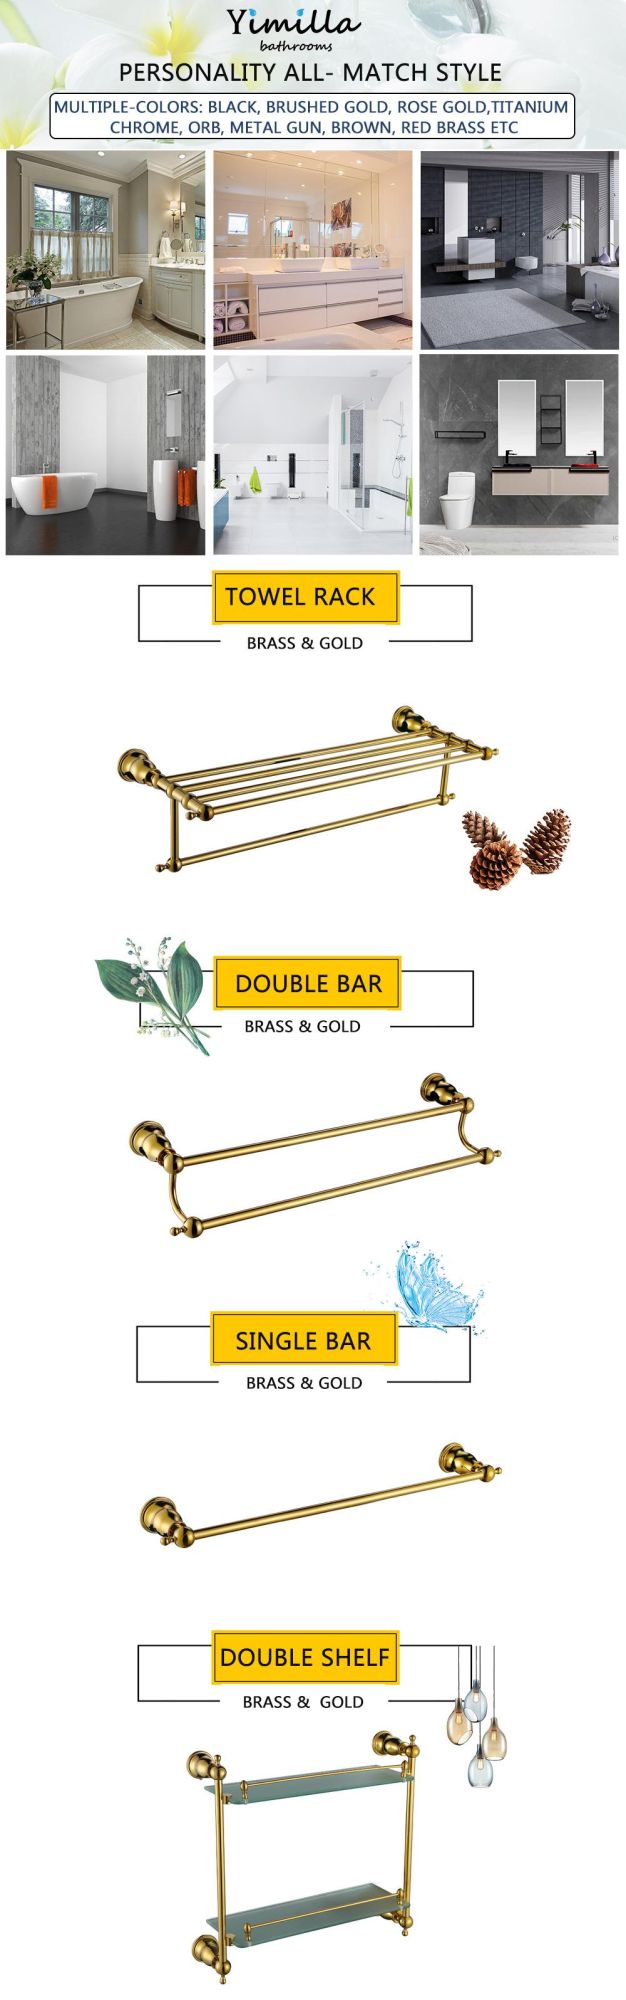 High Quality Brass Gold Bathroom Fittings Towel Rack Accessories